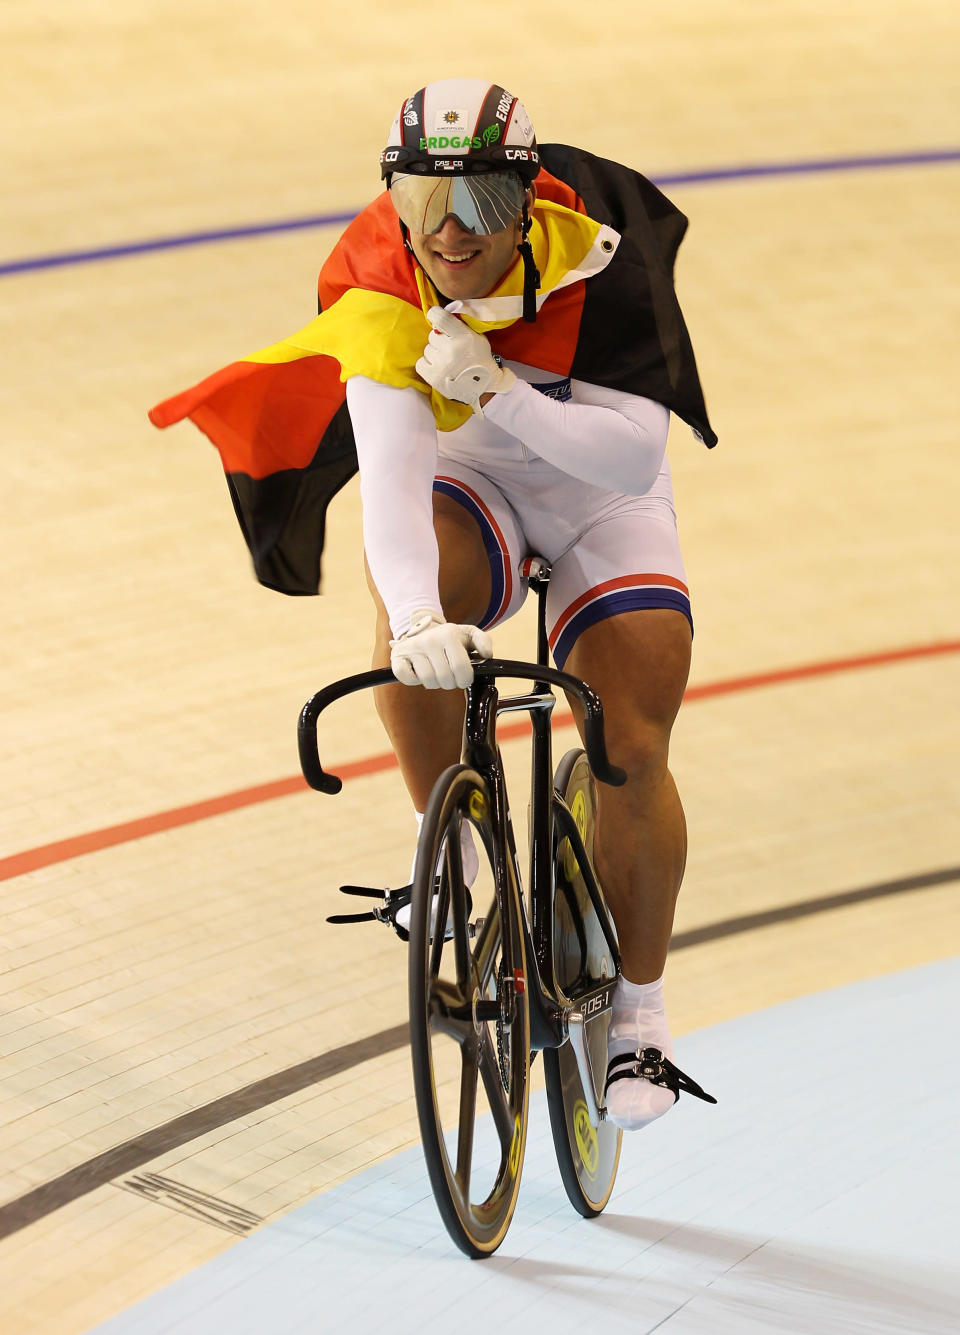 Robert Forstemann of Germany carries the Germany flag after winning Men's Team Sprint on Day One of the UCI Track Cycling World Championships at the Ballerup Super Arena on March 24, 2010 in Copenhagen, Denmark. (Getty Images)